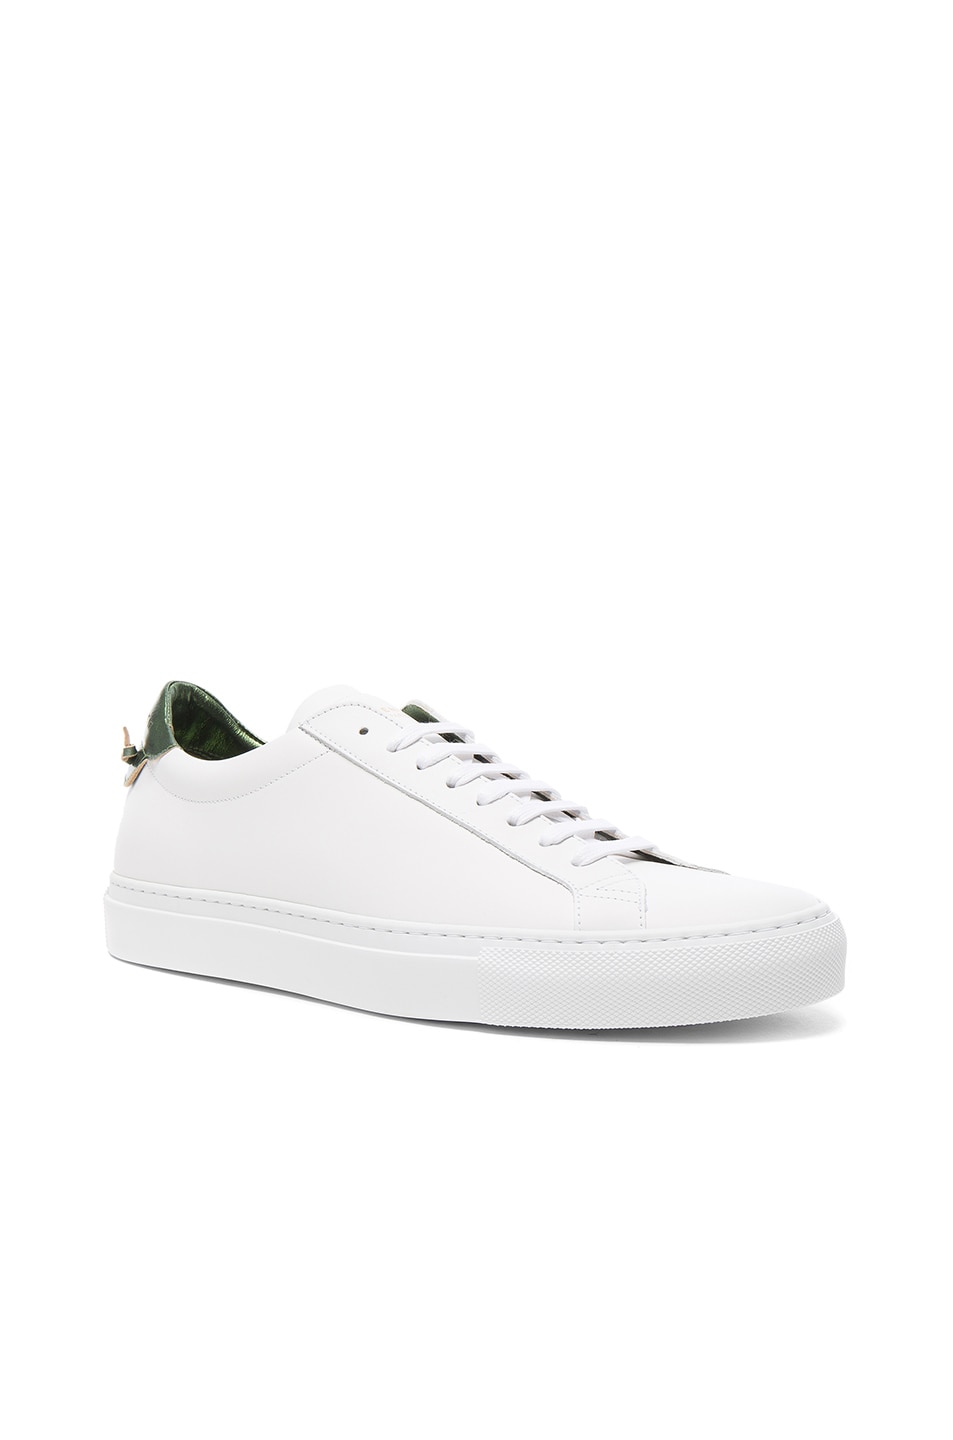 Image 1 of Givenchy Leather Urban Street Low Sneakers in Salvia